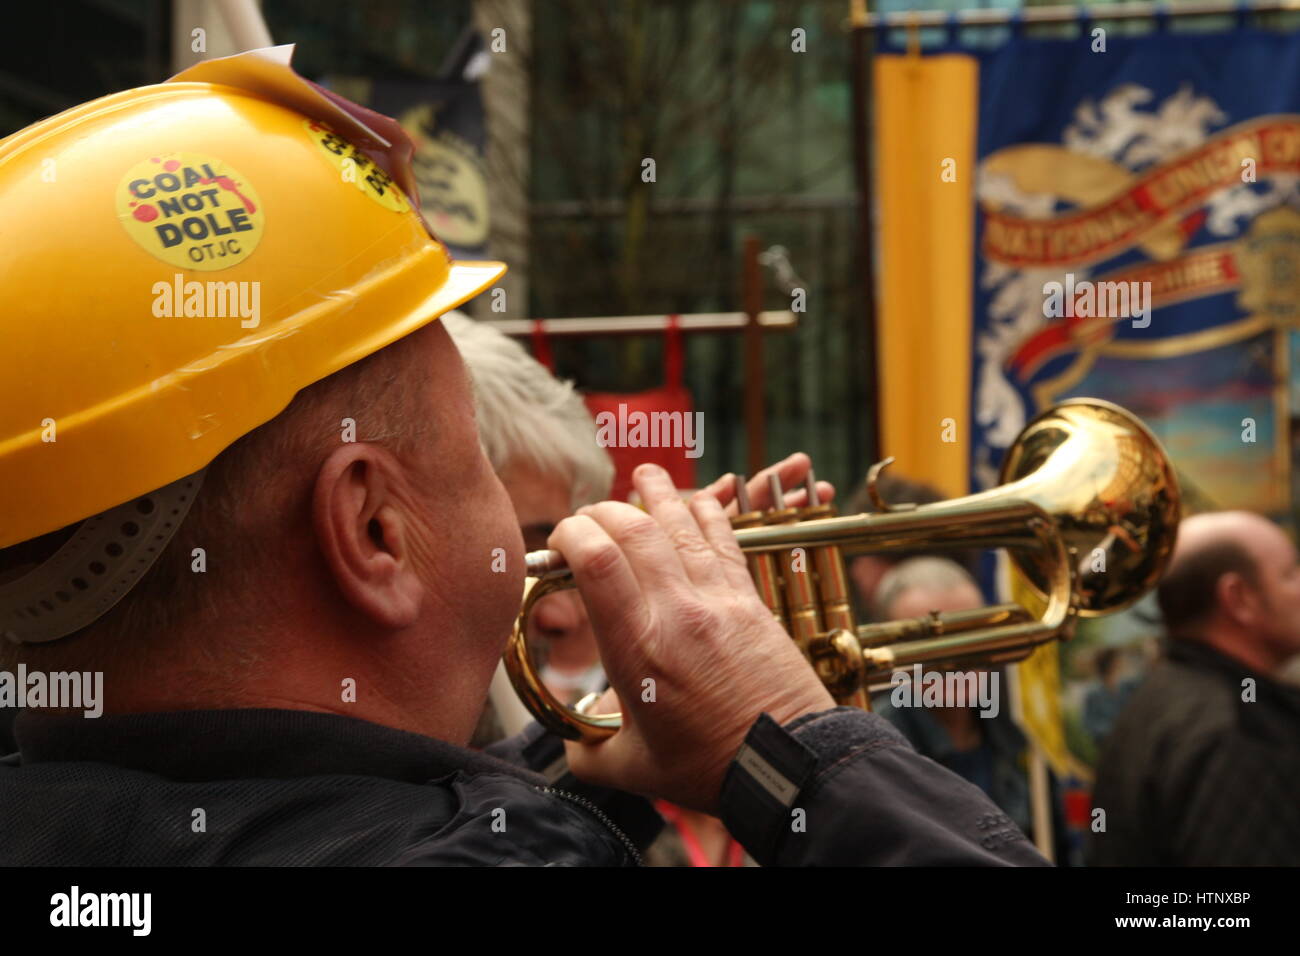 Westminster, London, UK 13th March 2017.A man in a miner's hat blows a trumpet as protesters from the Orgreave Truth and Justice Campaign hold a noisy protest outside the Home Office building. The campaign is demanding an inquiry into events during the Miner's Strike when police attacked miners picketing the Orgreave coking plant. Roland Ravenhill/Alamy Live News Stock Photo